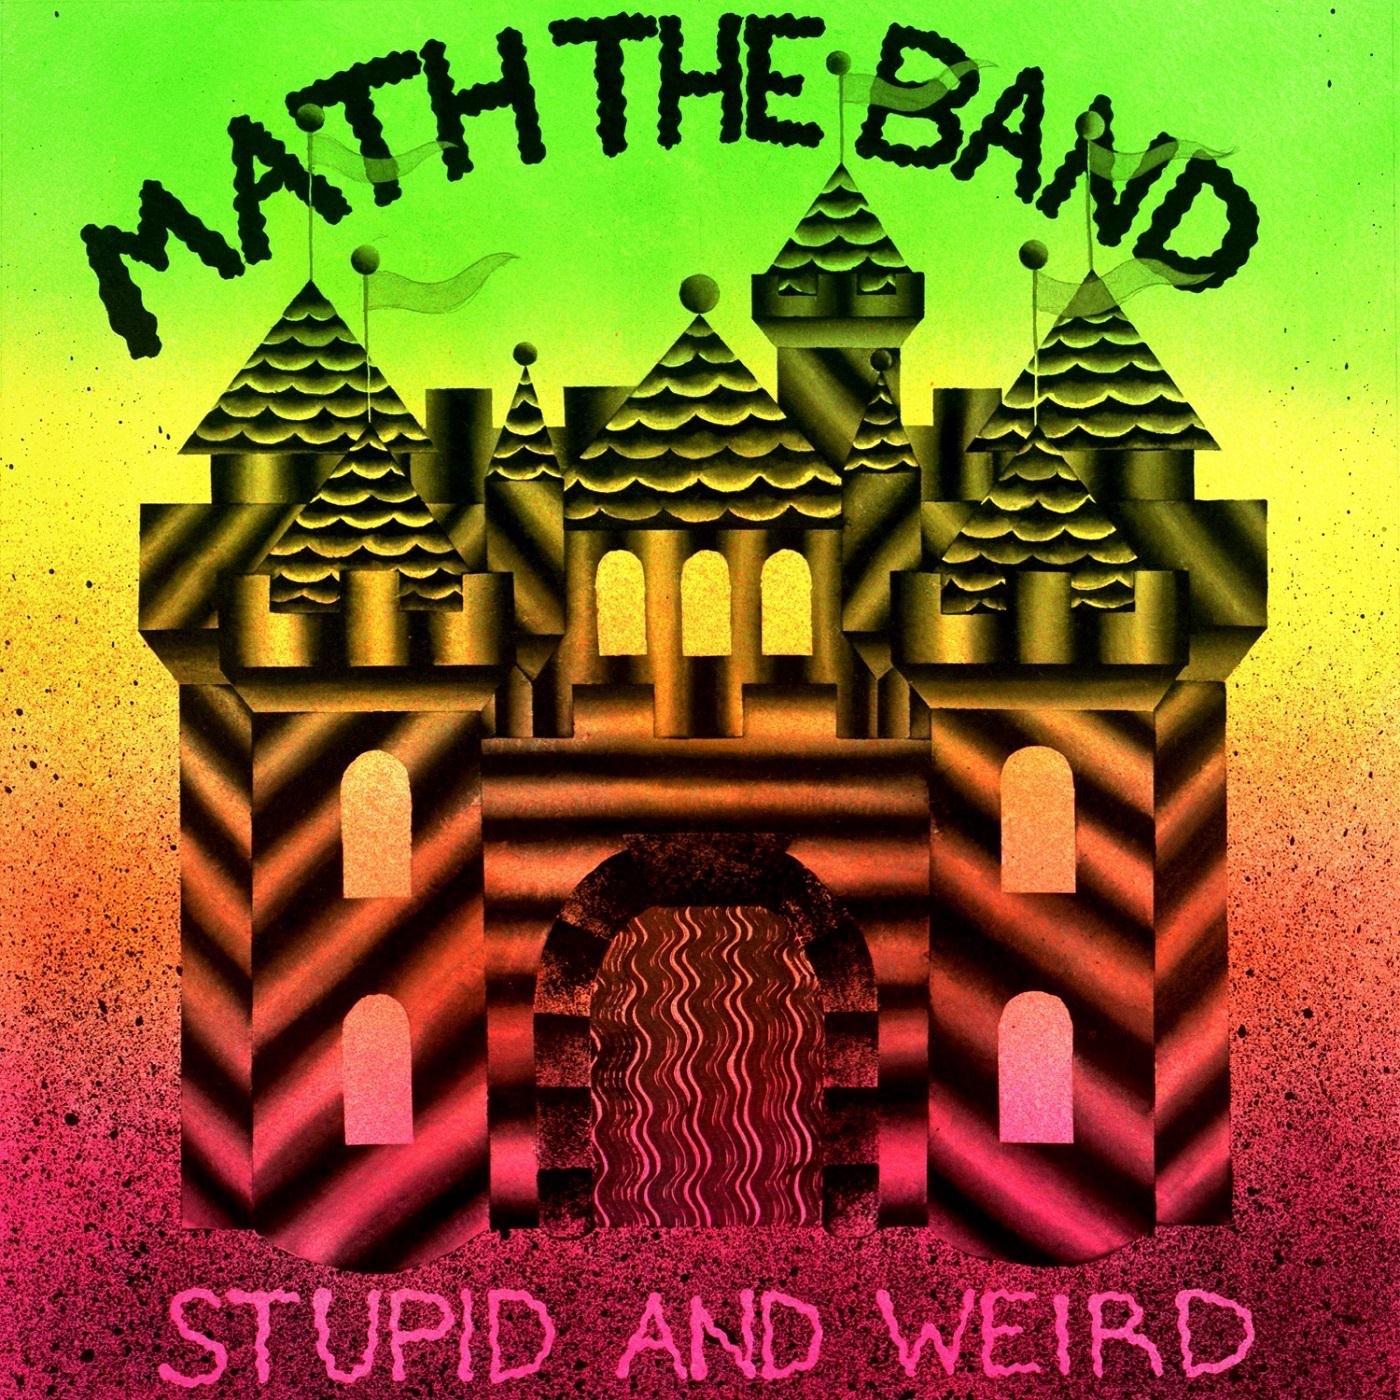 Stupid and Weird by Math The Band